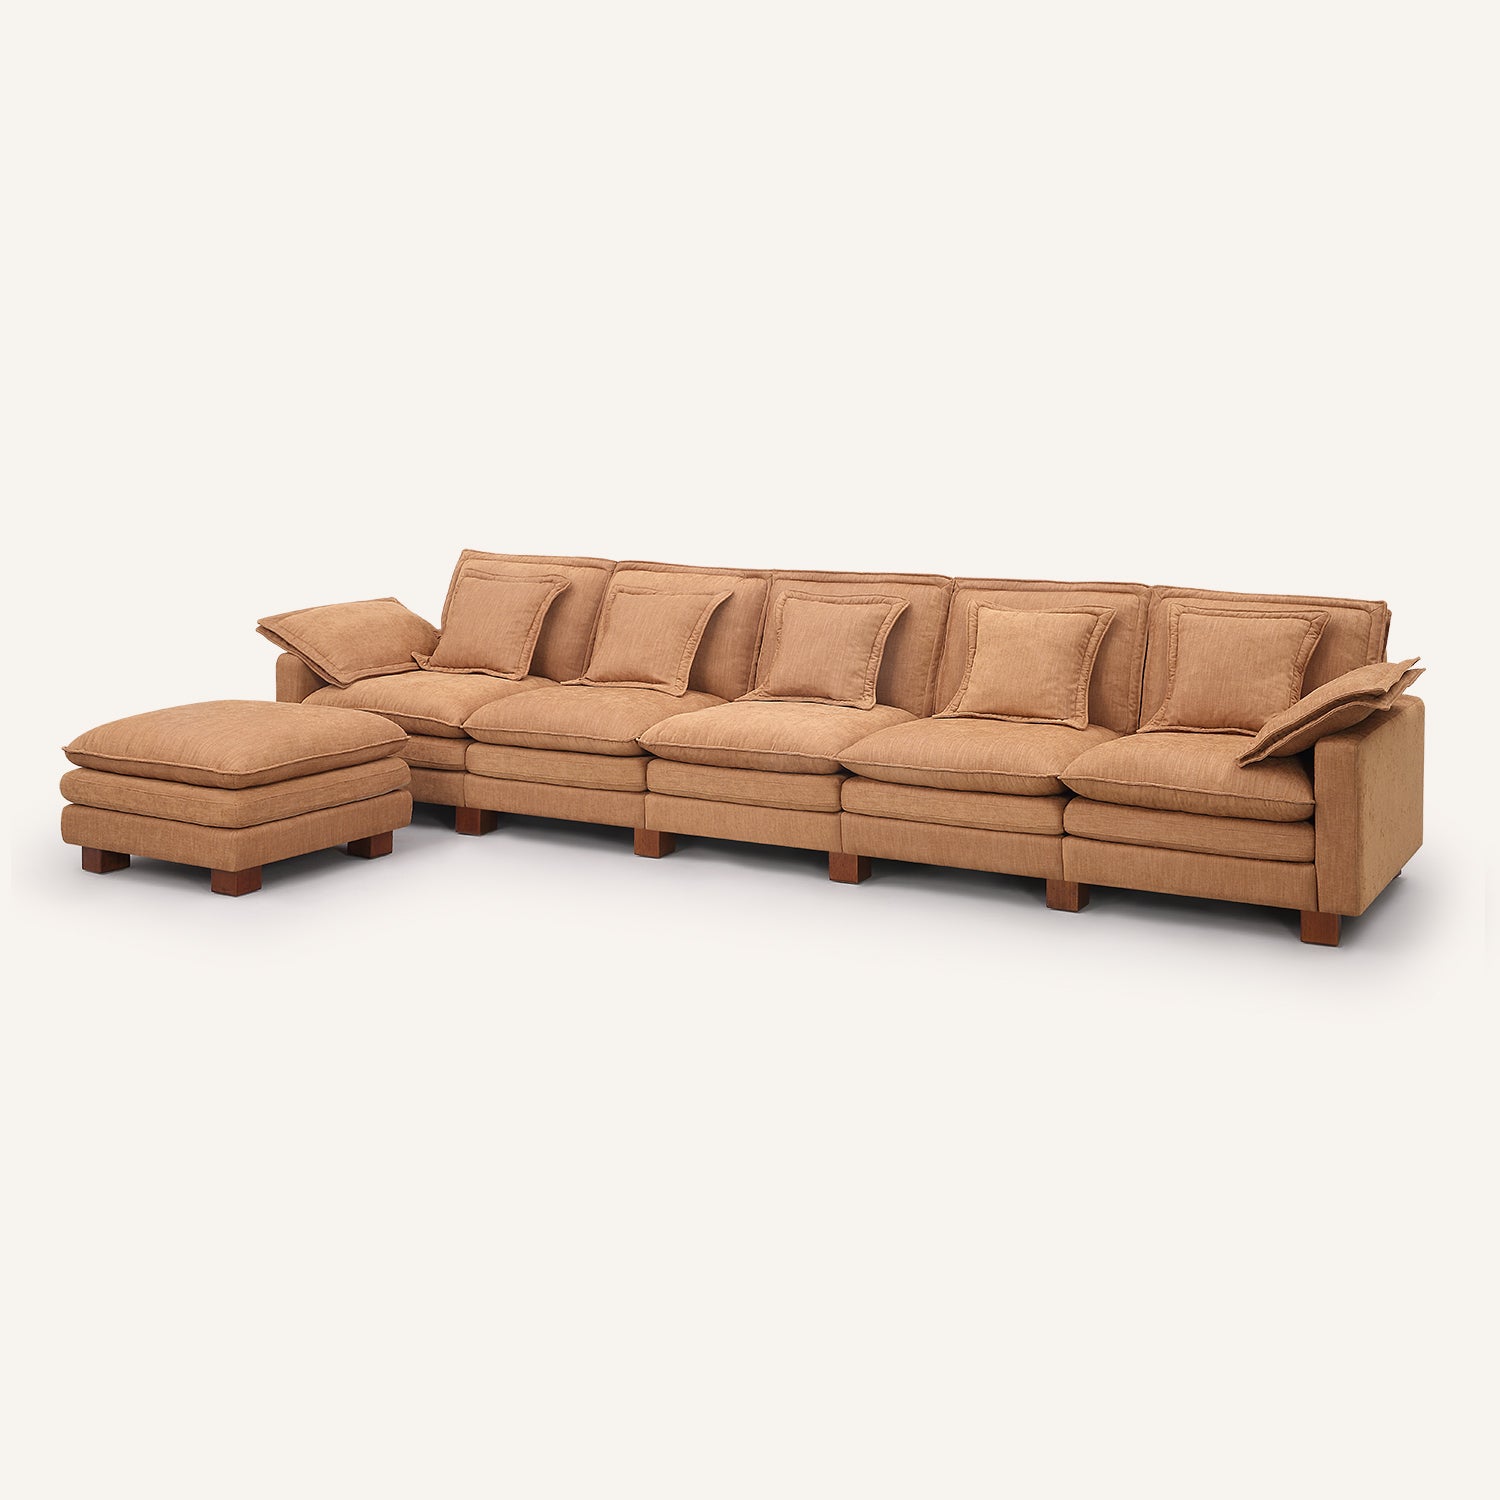 Stacked Tan Linen 5-Seat Sofa with Ottoman